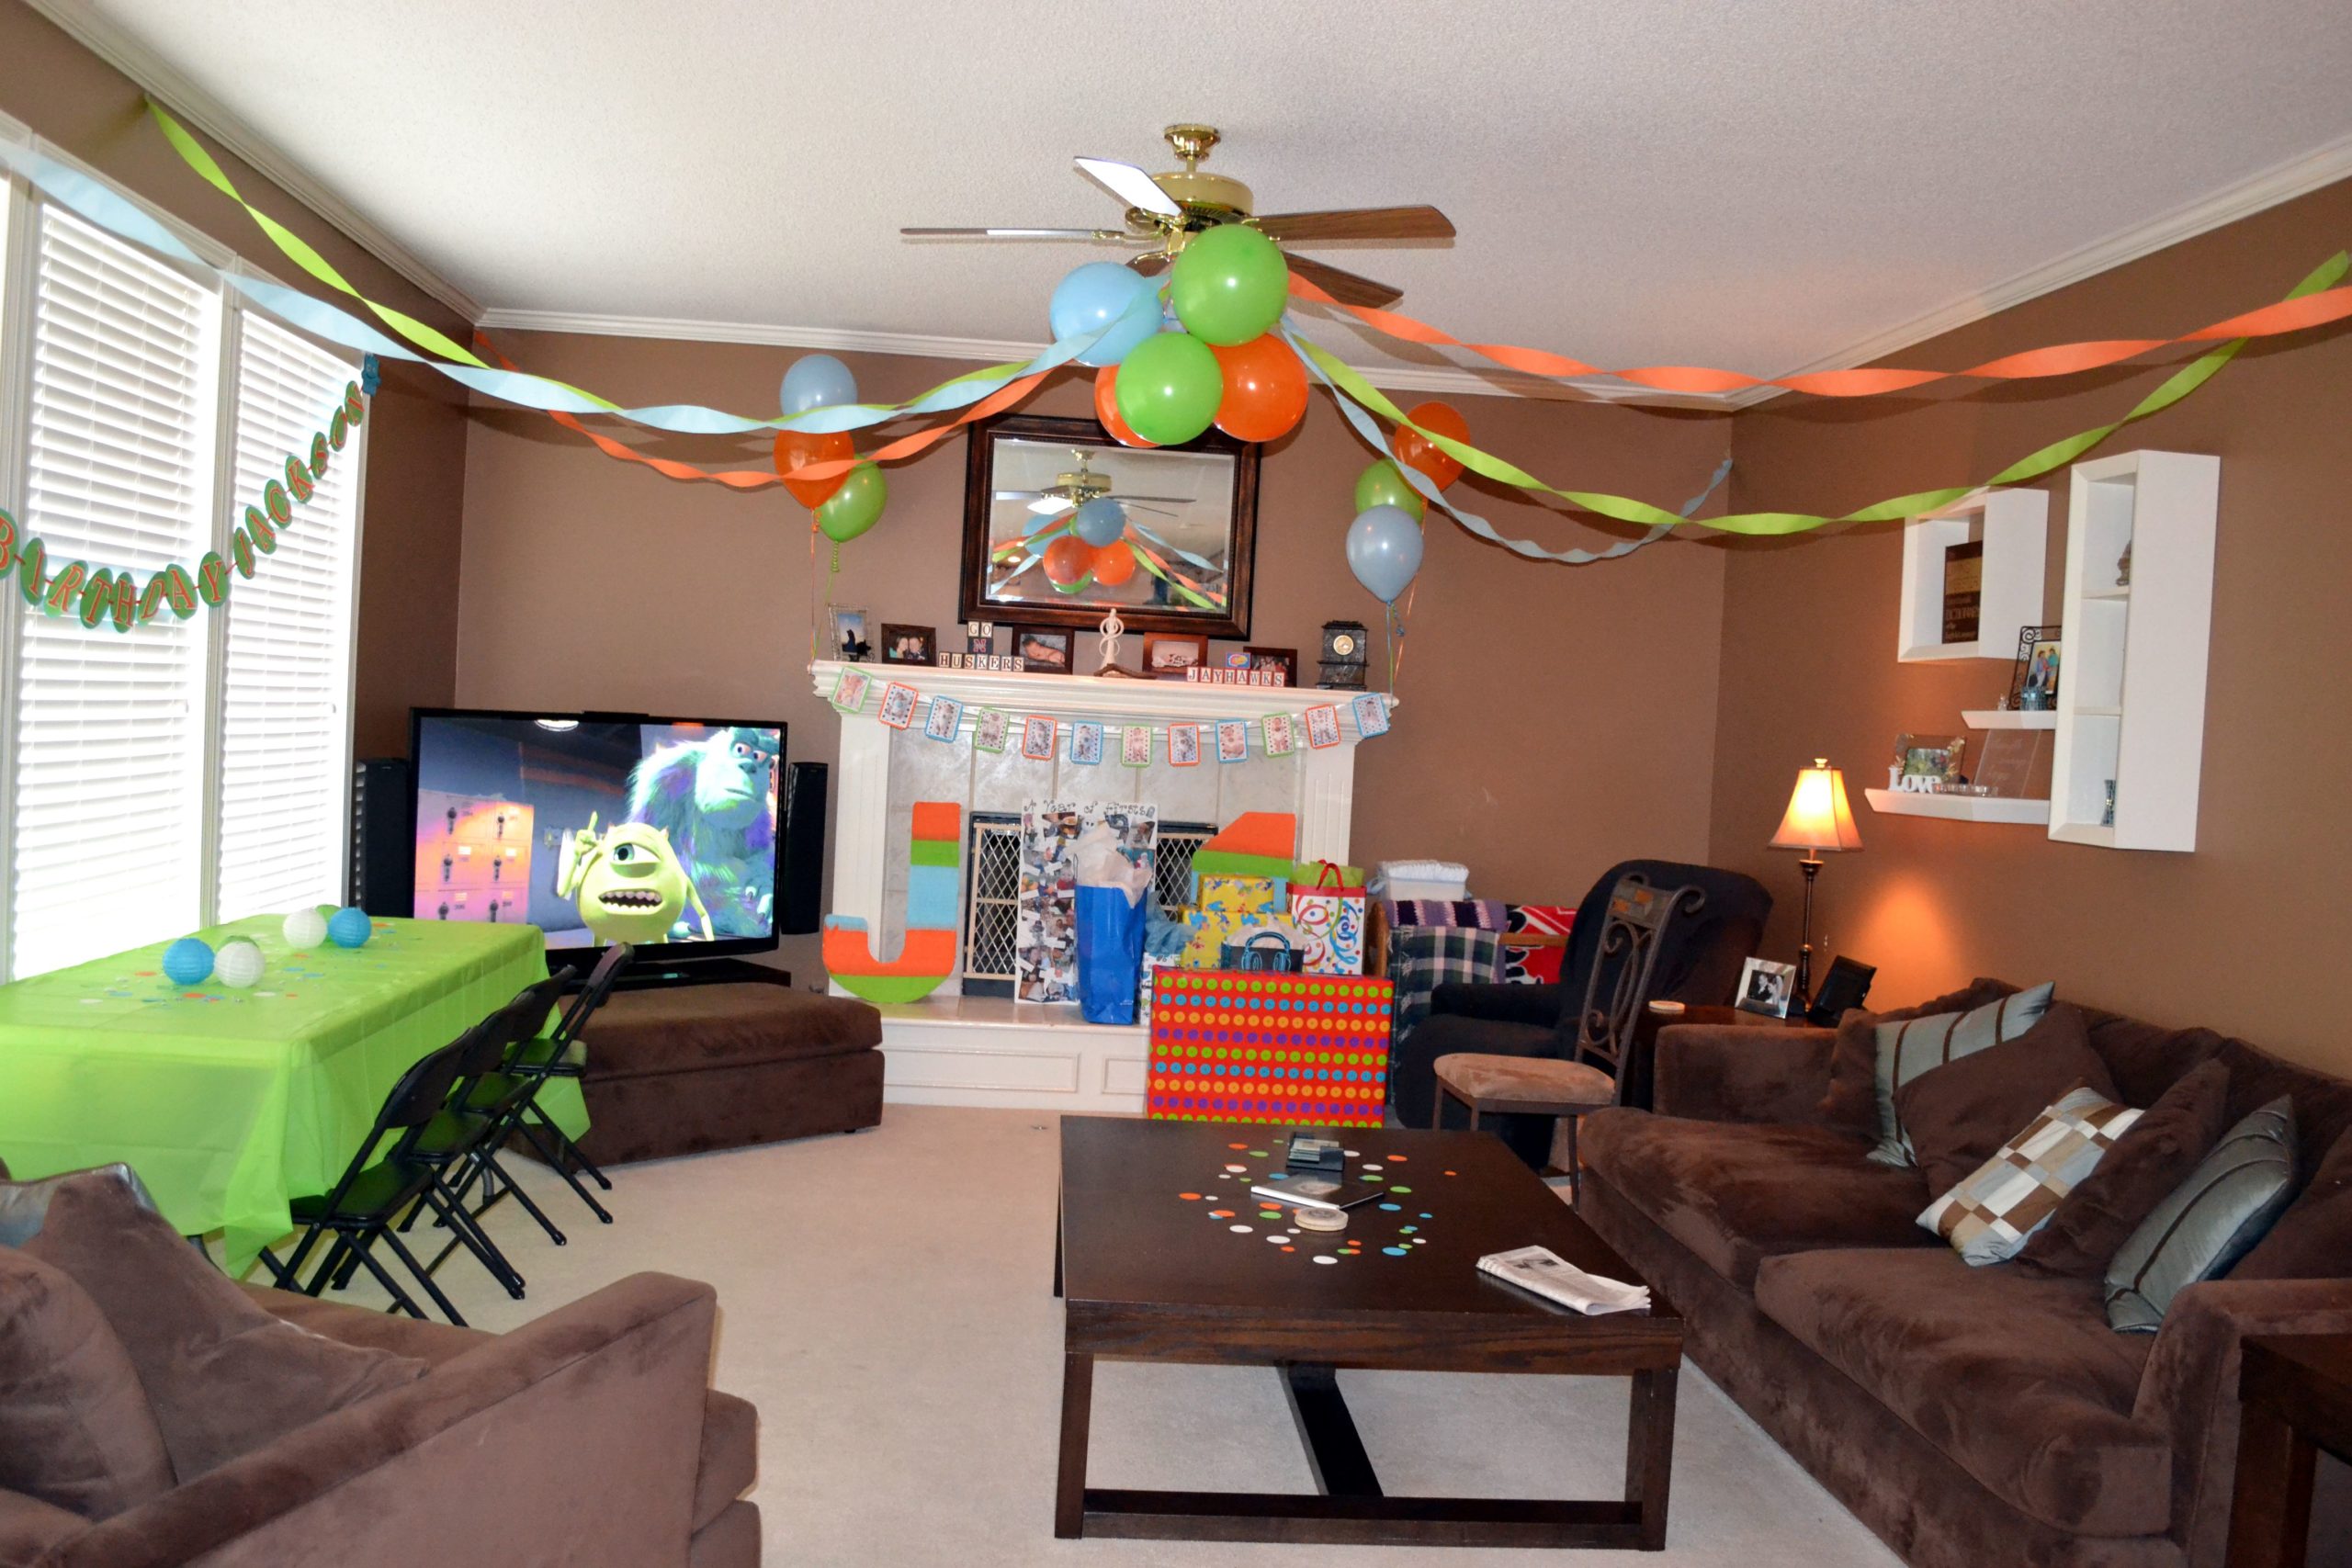 How To Decorate Living Room For Birthday Party On Budget